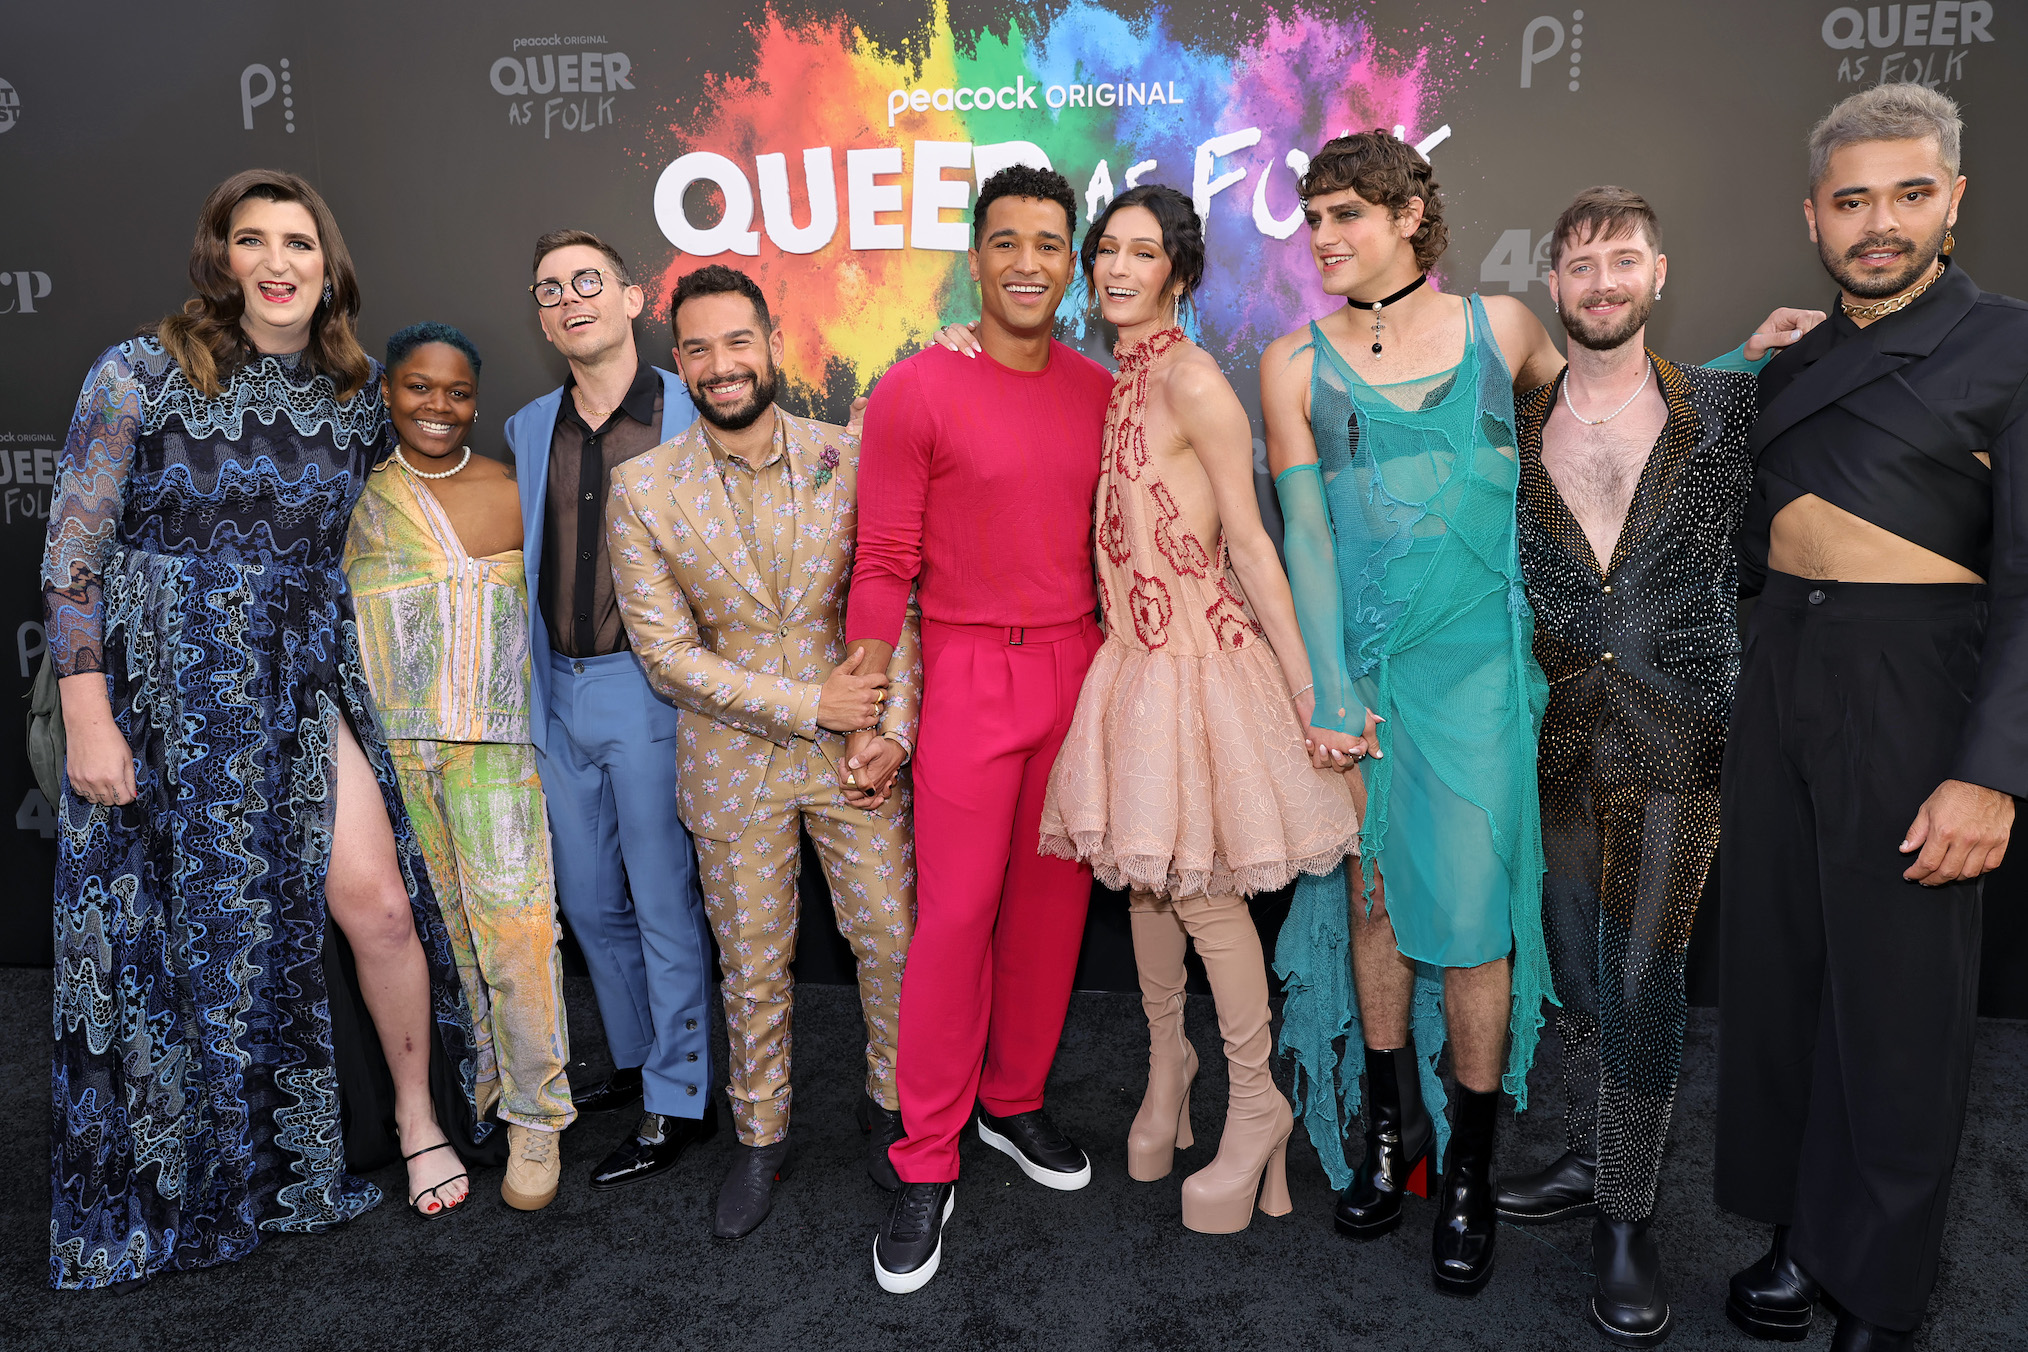 Jaclyn Moore, CG, Ryan O'Connell, Johnny Sibilly, Devin Way, Jesse James Keitel, Fin Argus, Stephen Dunn, and Chris Renfro attend Peacock's "Queer As Folk" World Premiere Event